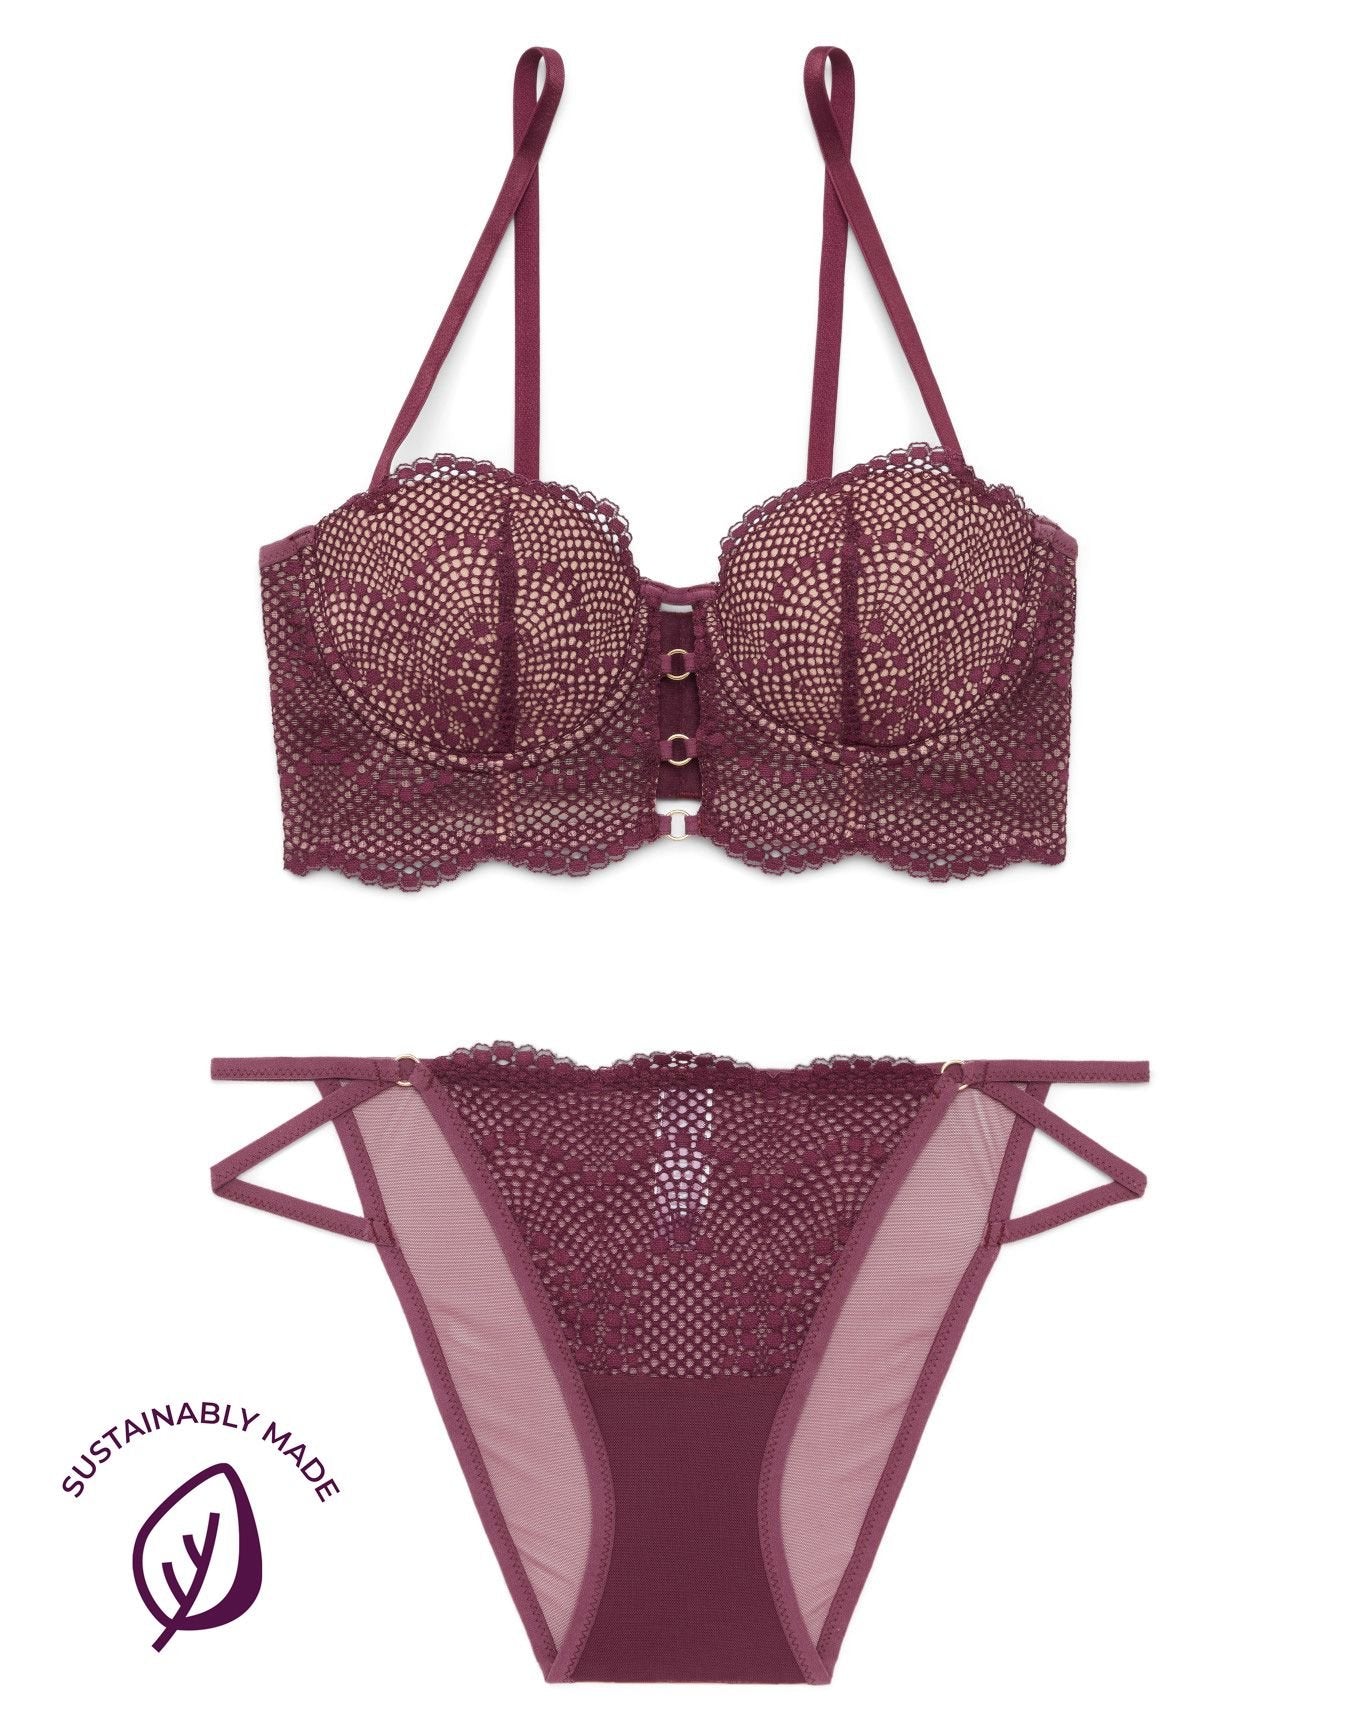 Adore Me Margaritte Push-Up Balconette in color Grape Wine and shape balconette